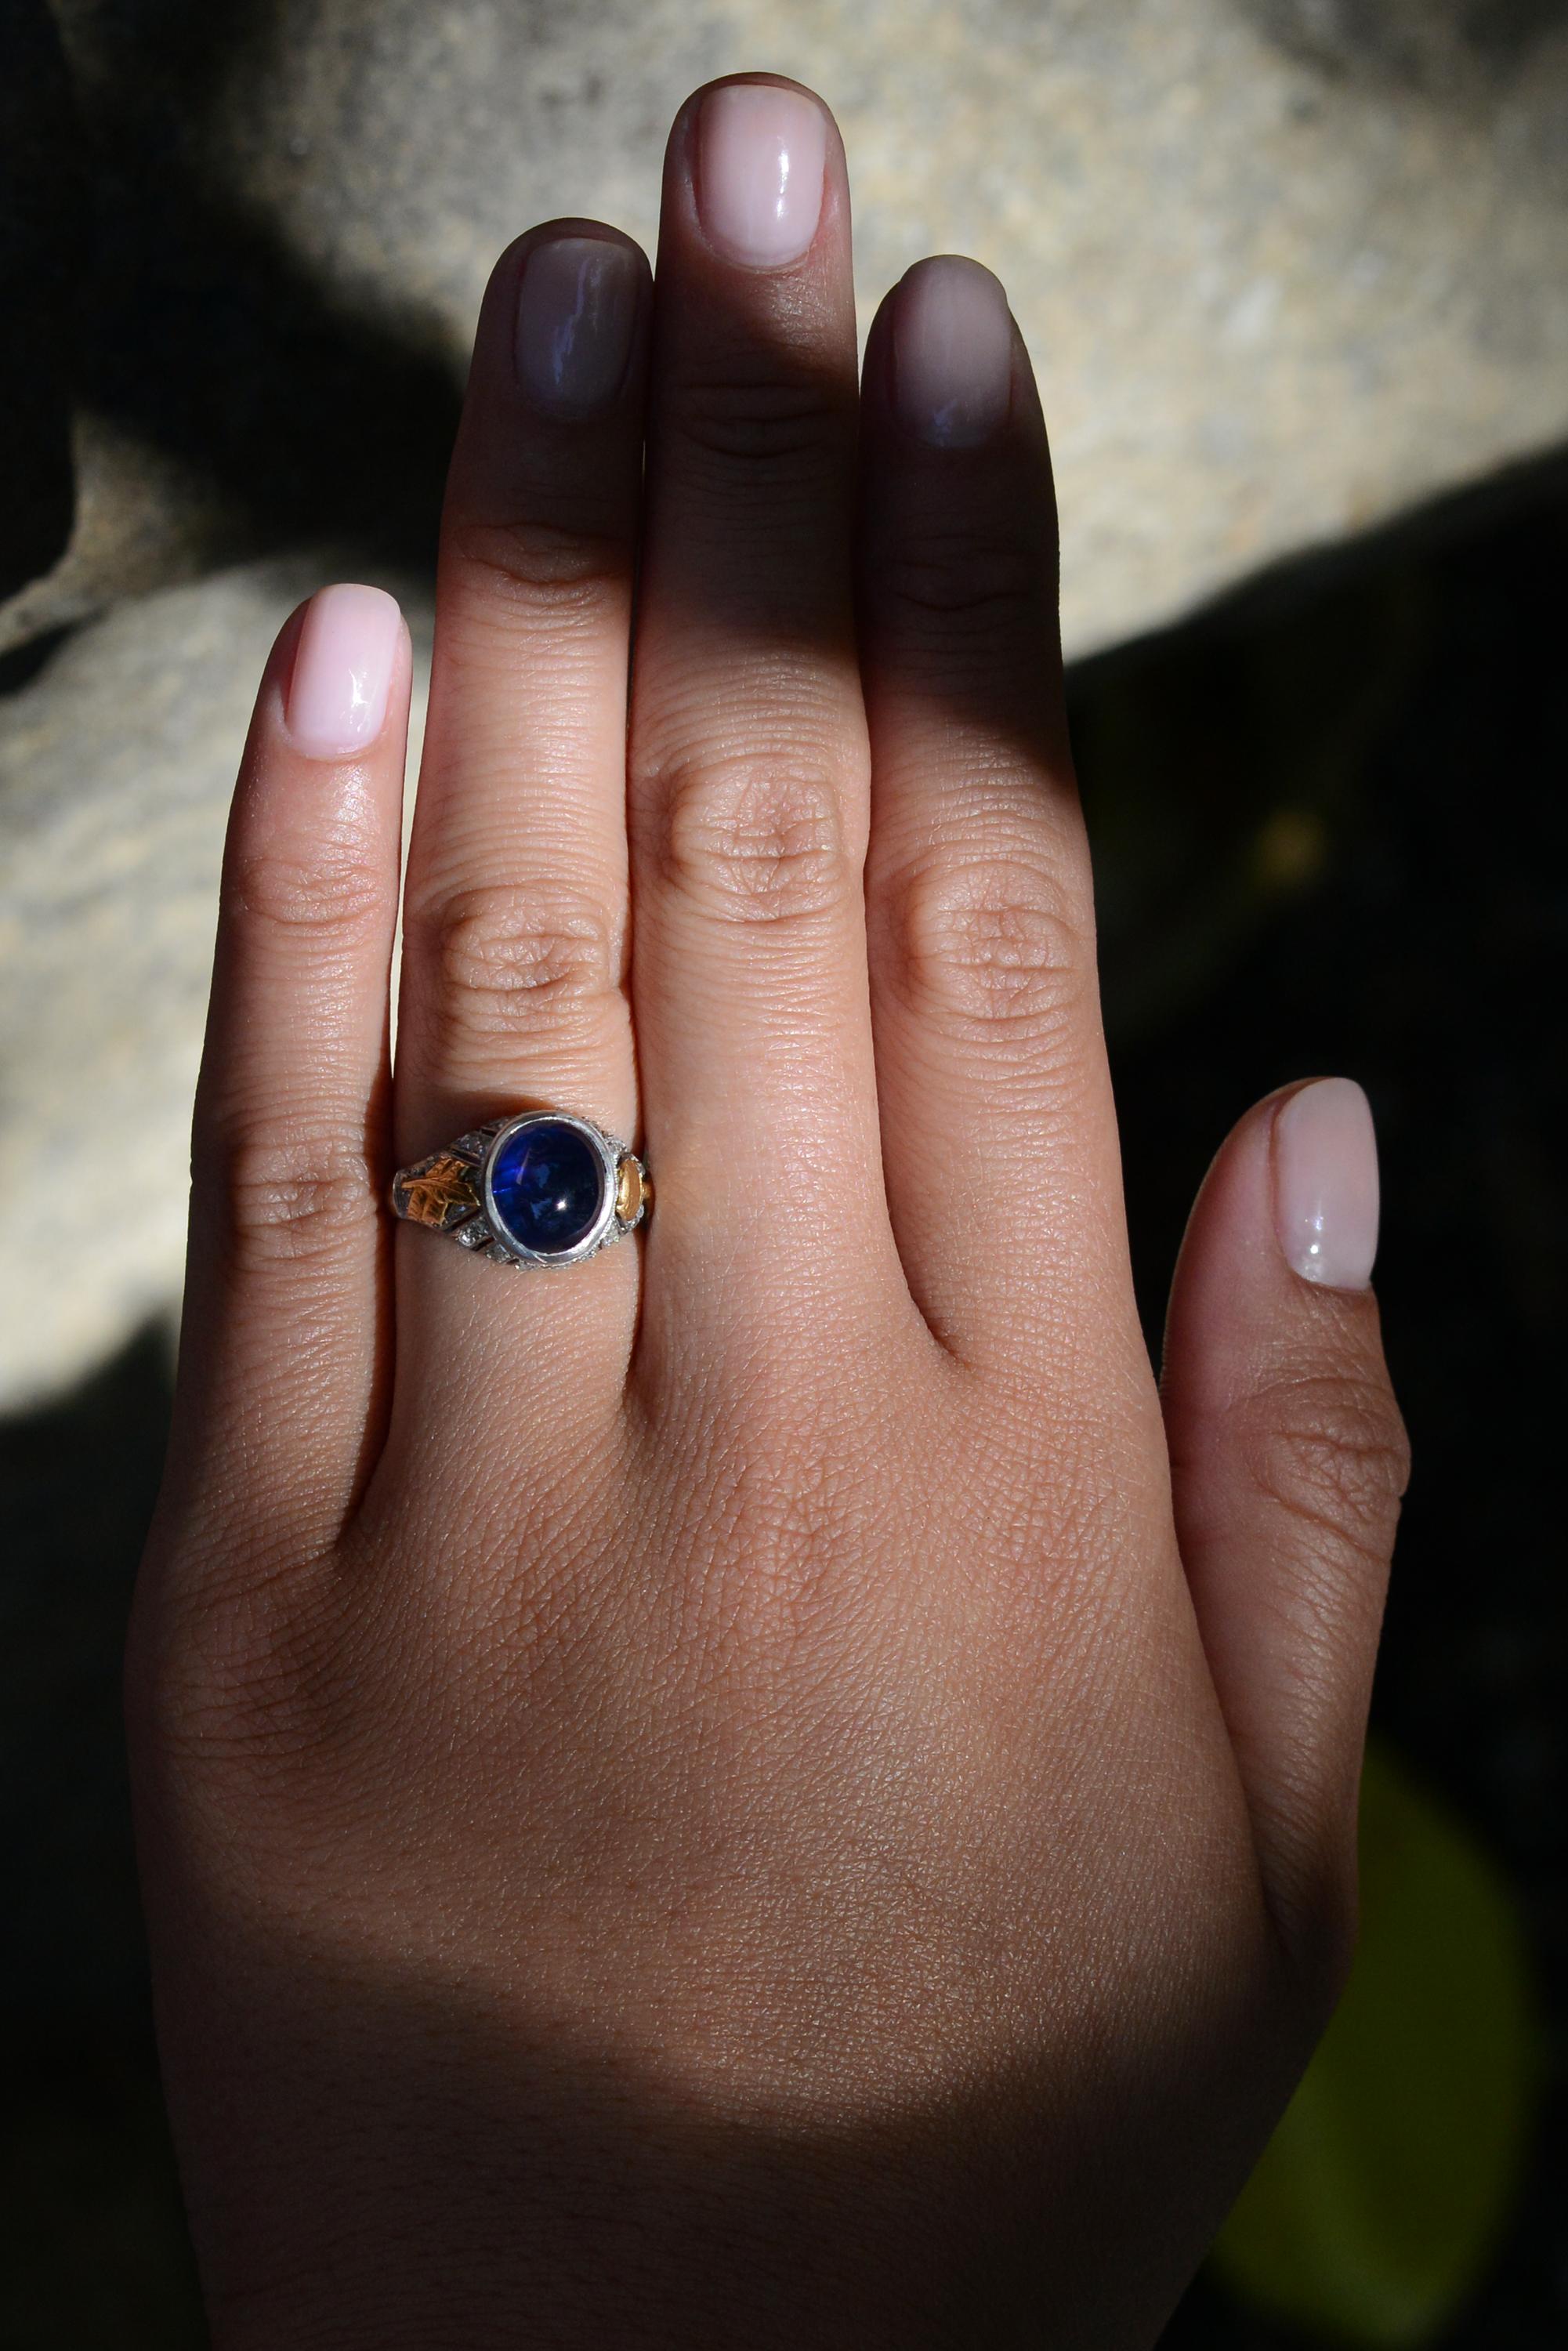 This antique Art Nouveau gemstone engagement ring presents a lovely 2 tone composition centered with a dark blue sapphire cabochon. Crafted with exquisite attention to detail, the romantic rose cut diamonds perfectly complement the tranquil natural